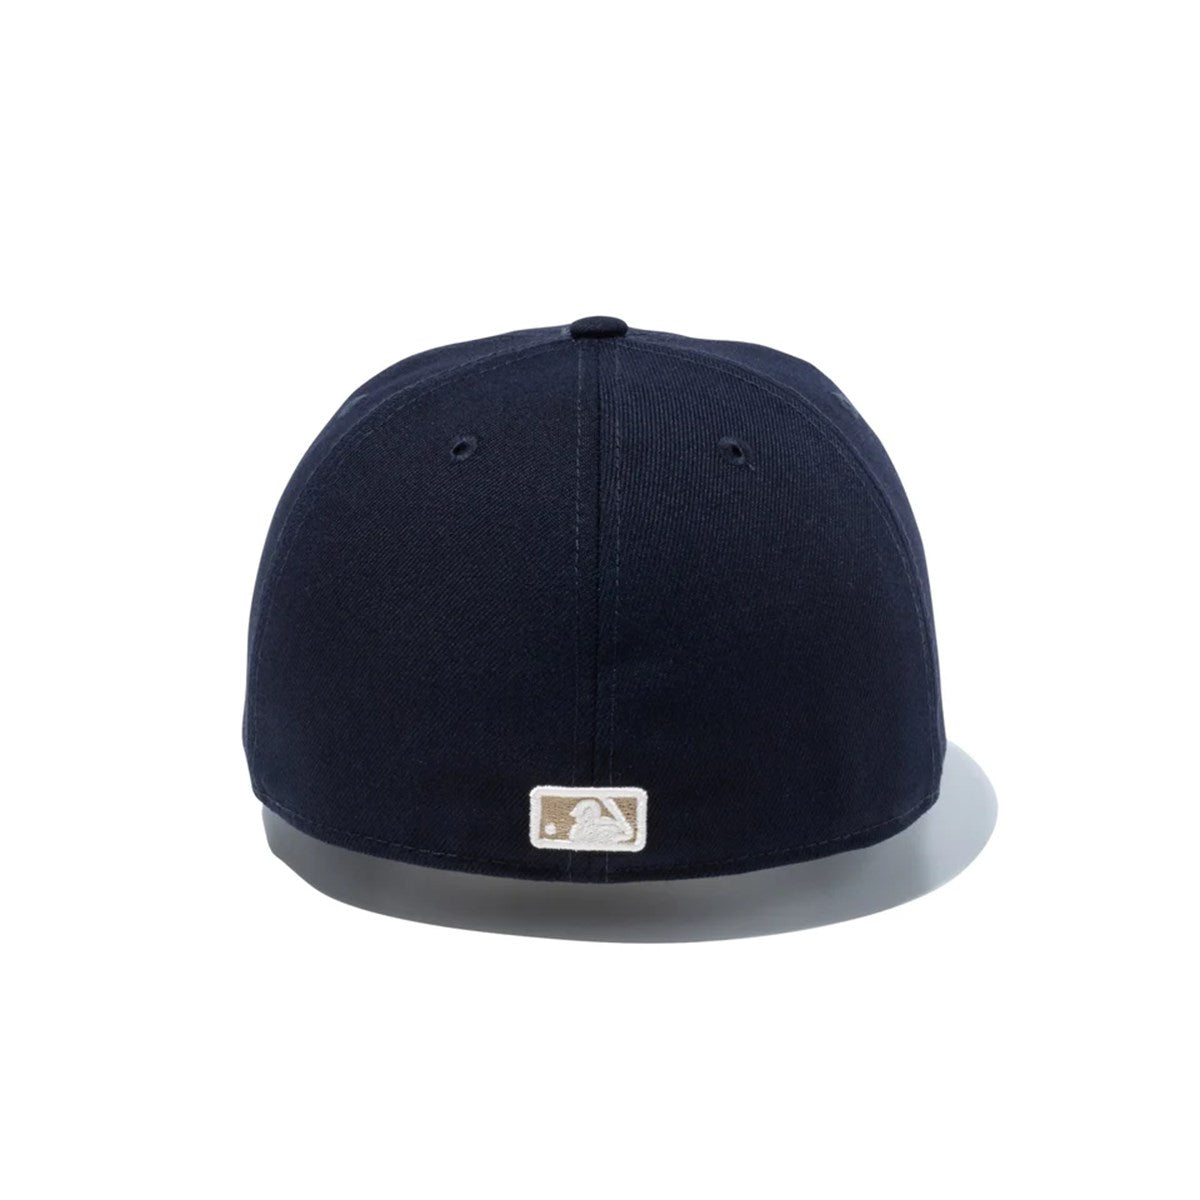 NEW ERA New York Yankees - 59FIFTY Vintage Color NVY【14174580】